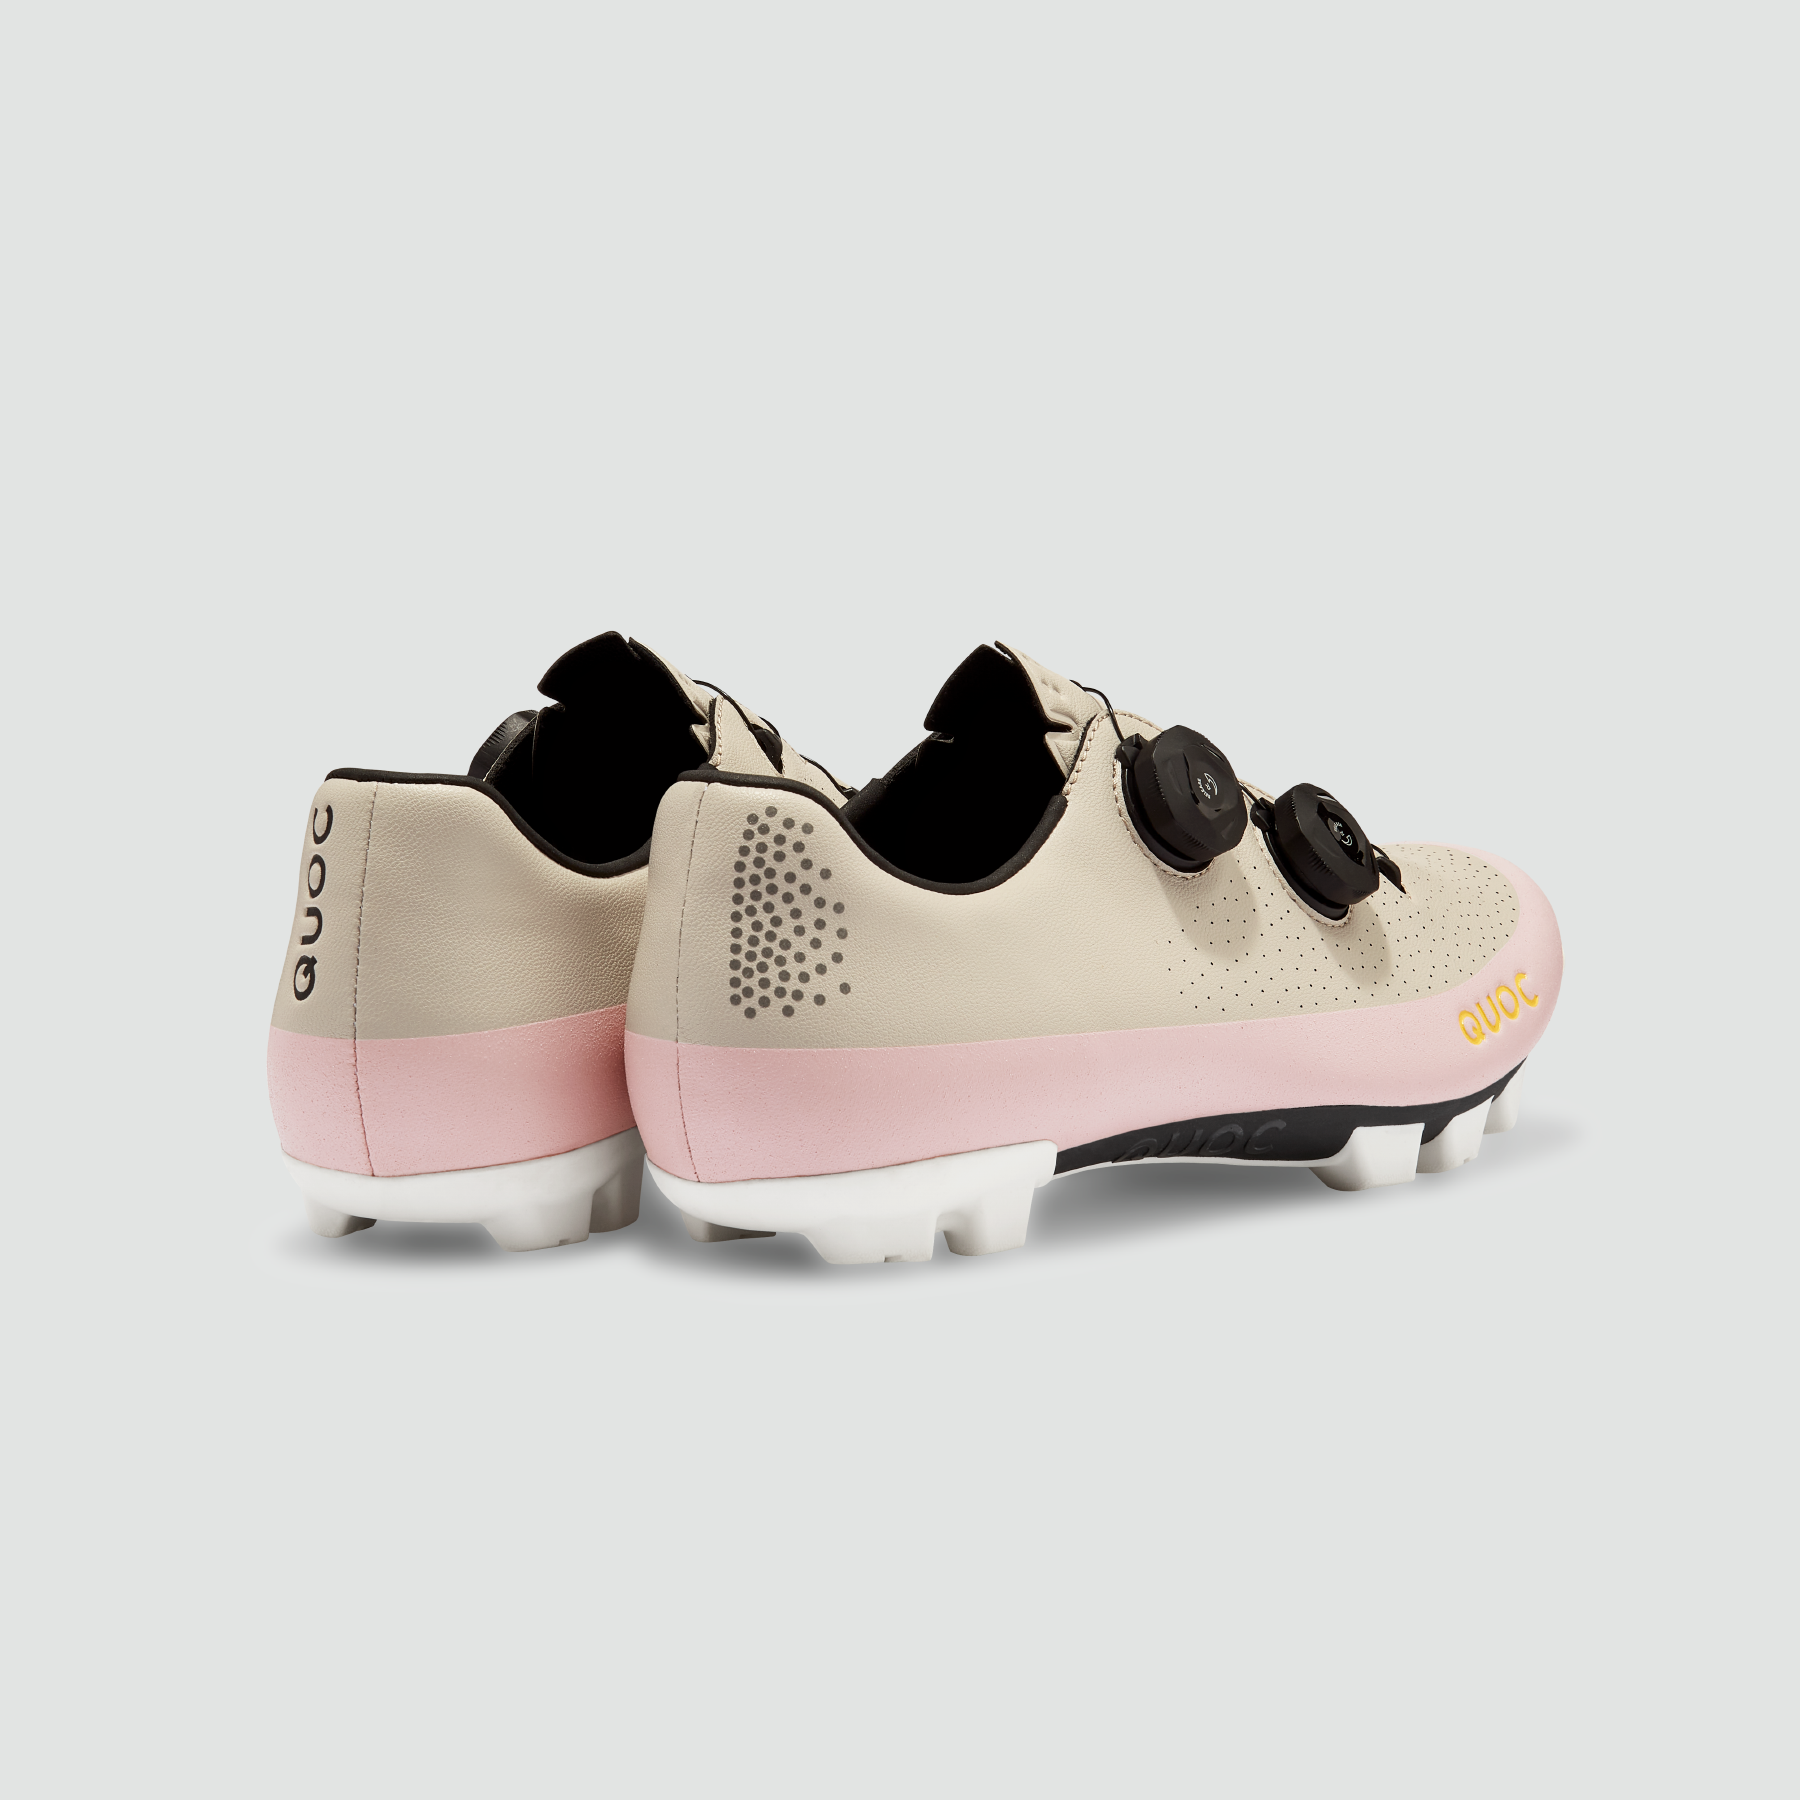 GT XC Shoes - Dusty Pink